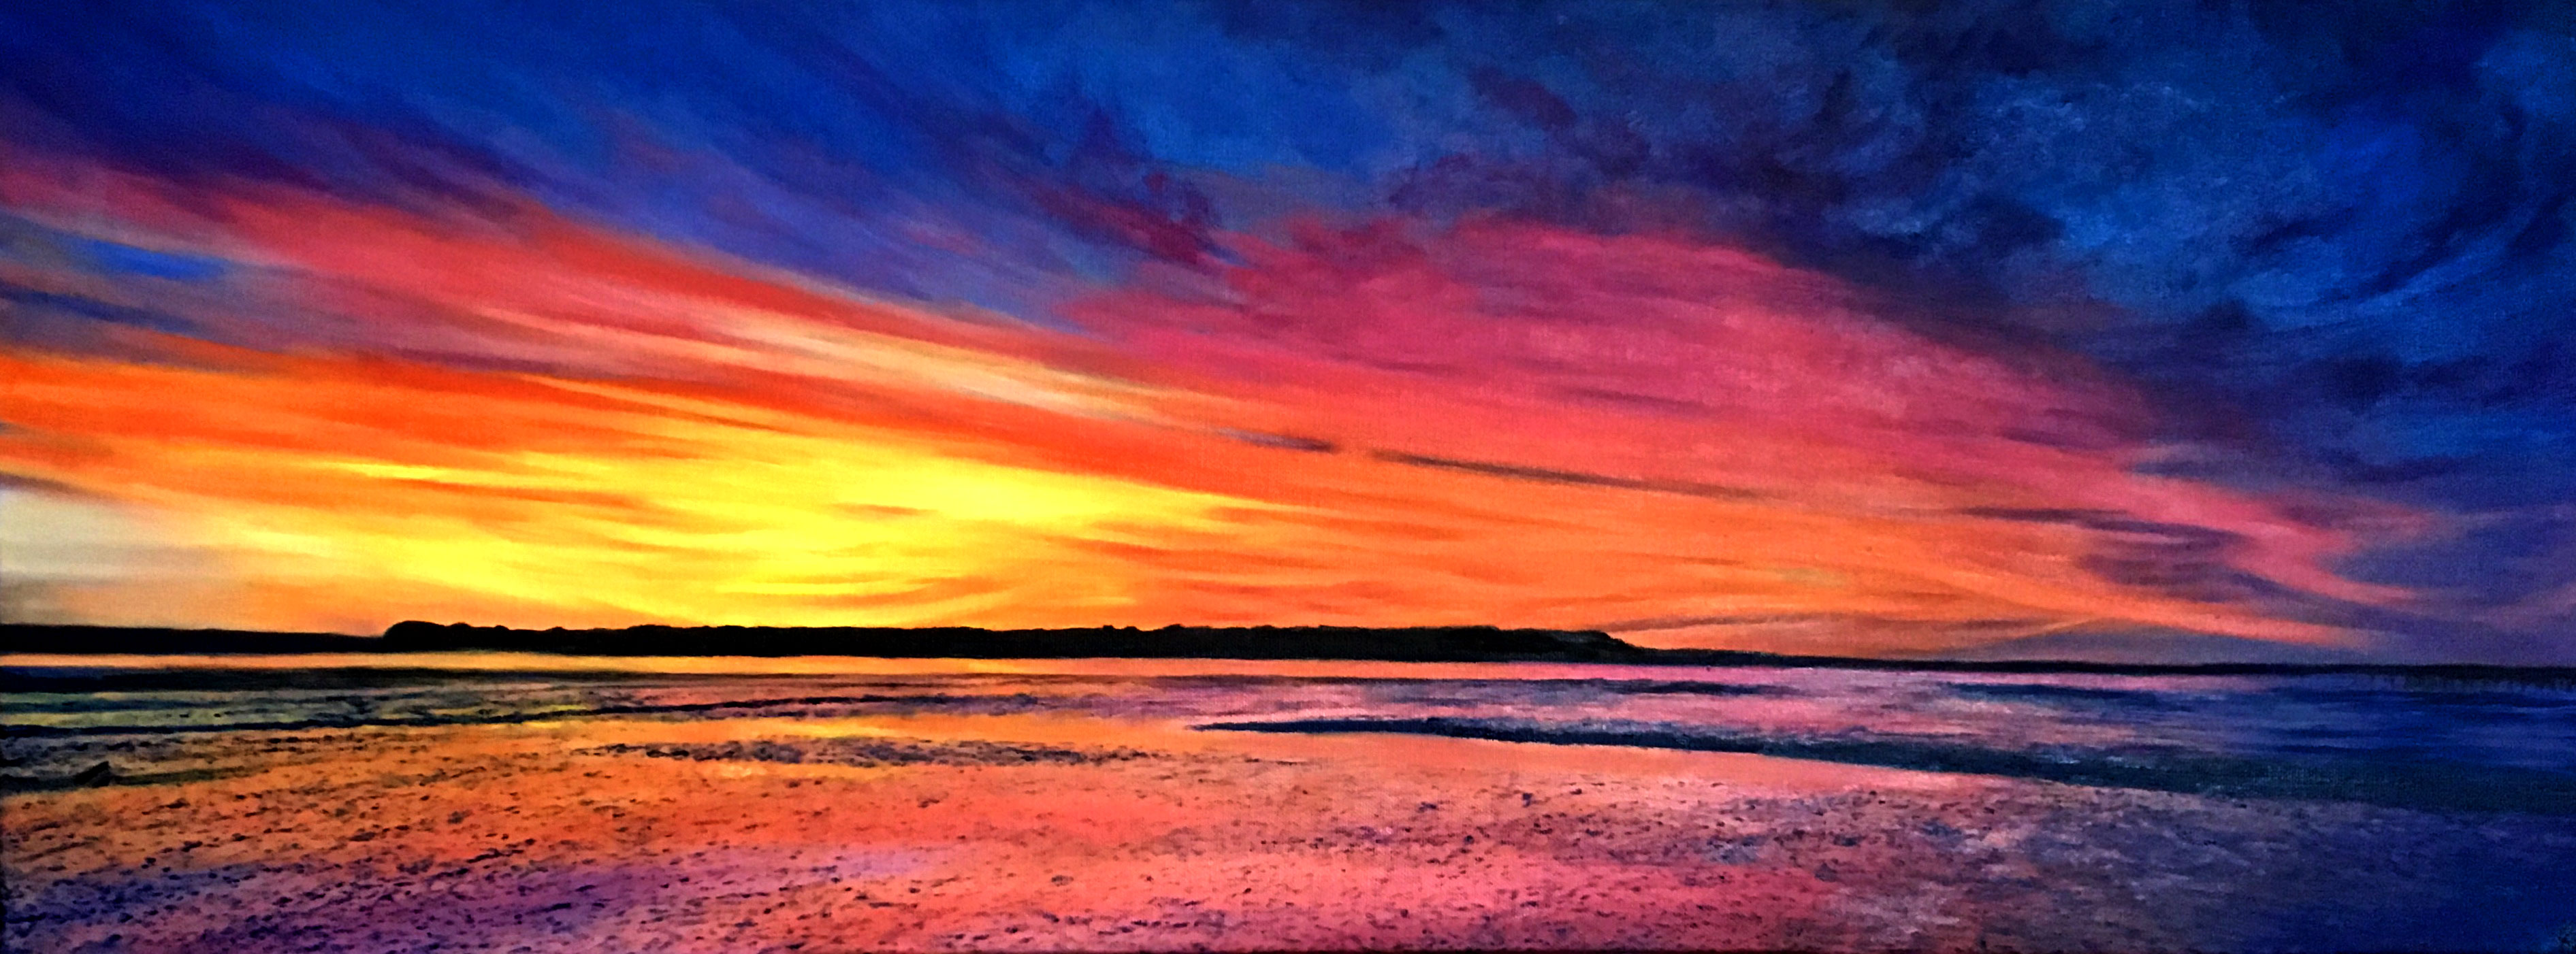 Oil painting of a vivid colourful sunset over Brownsea Island, Poole Harbour, Dorset, UK